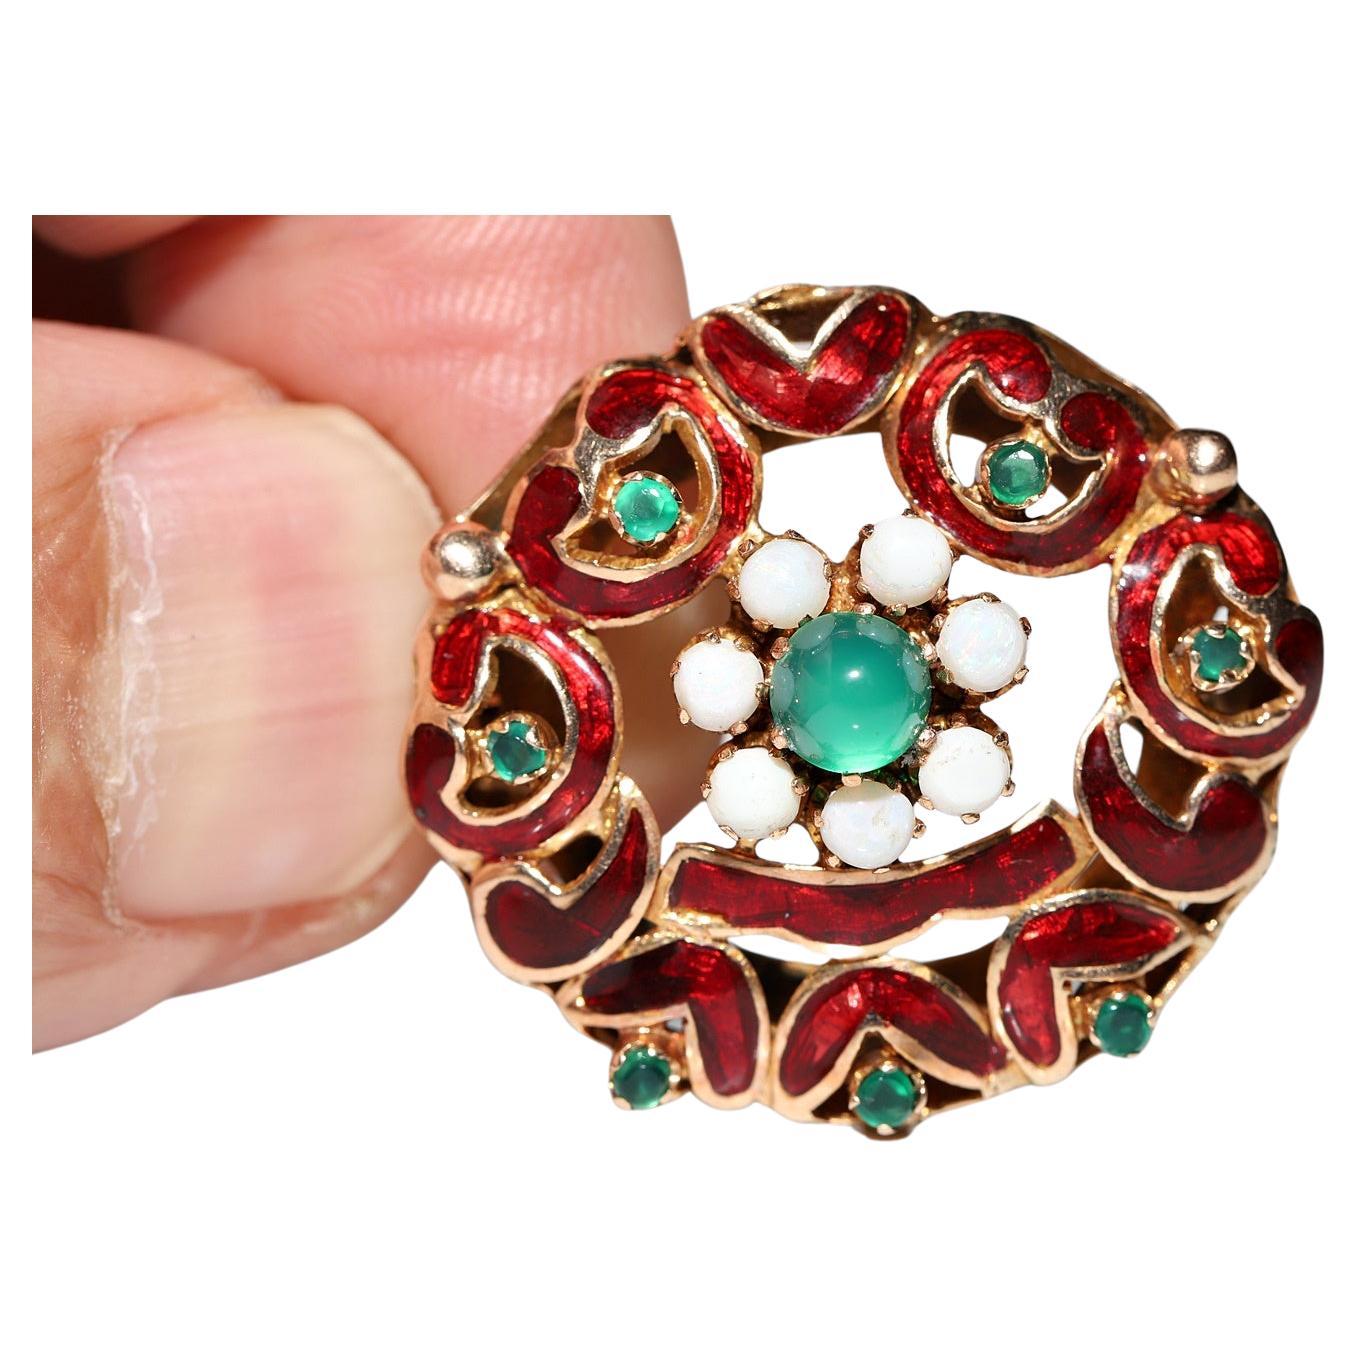 Vintage Circa 1960s 14k Gold Natural Opal And Jade Decorated Enamel Brooch For Sale